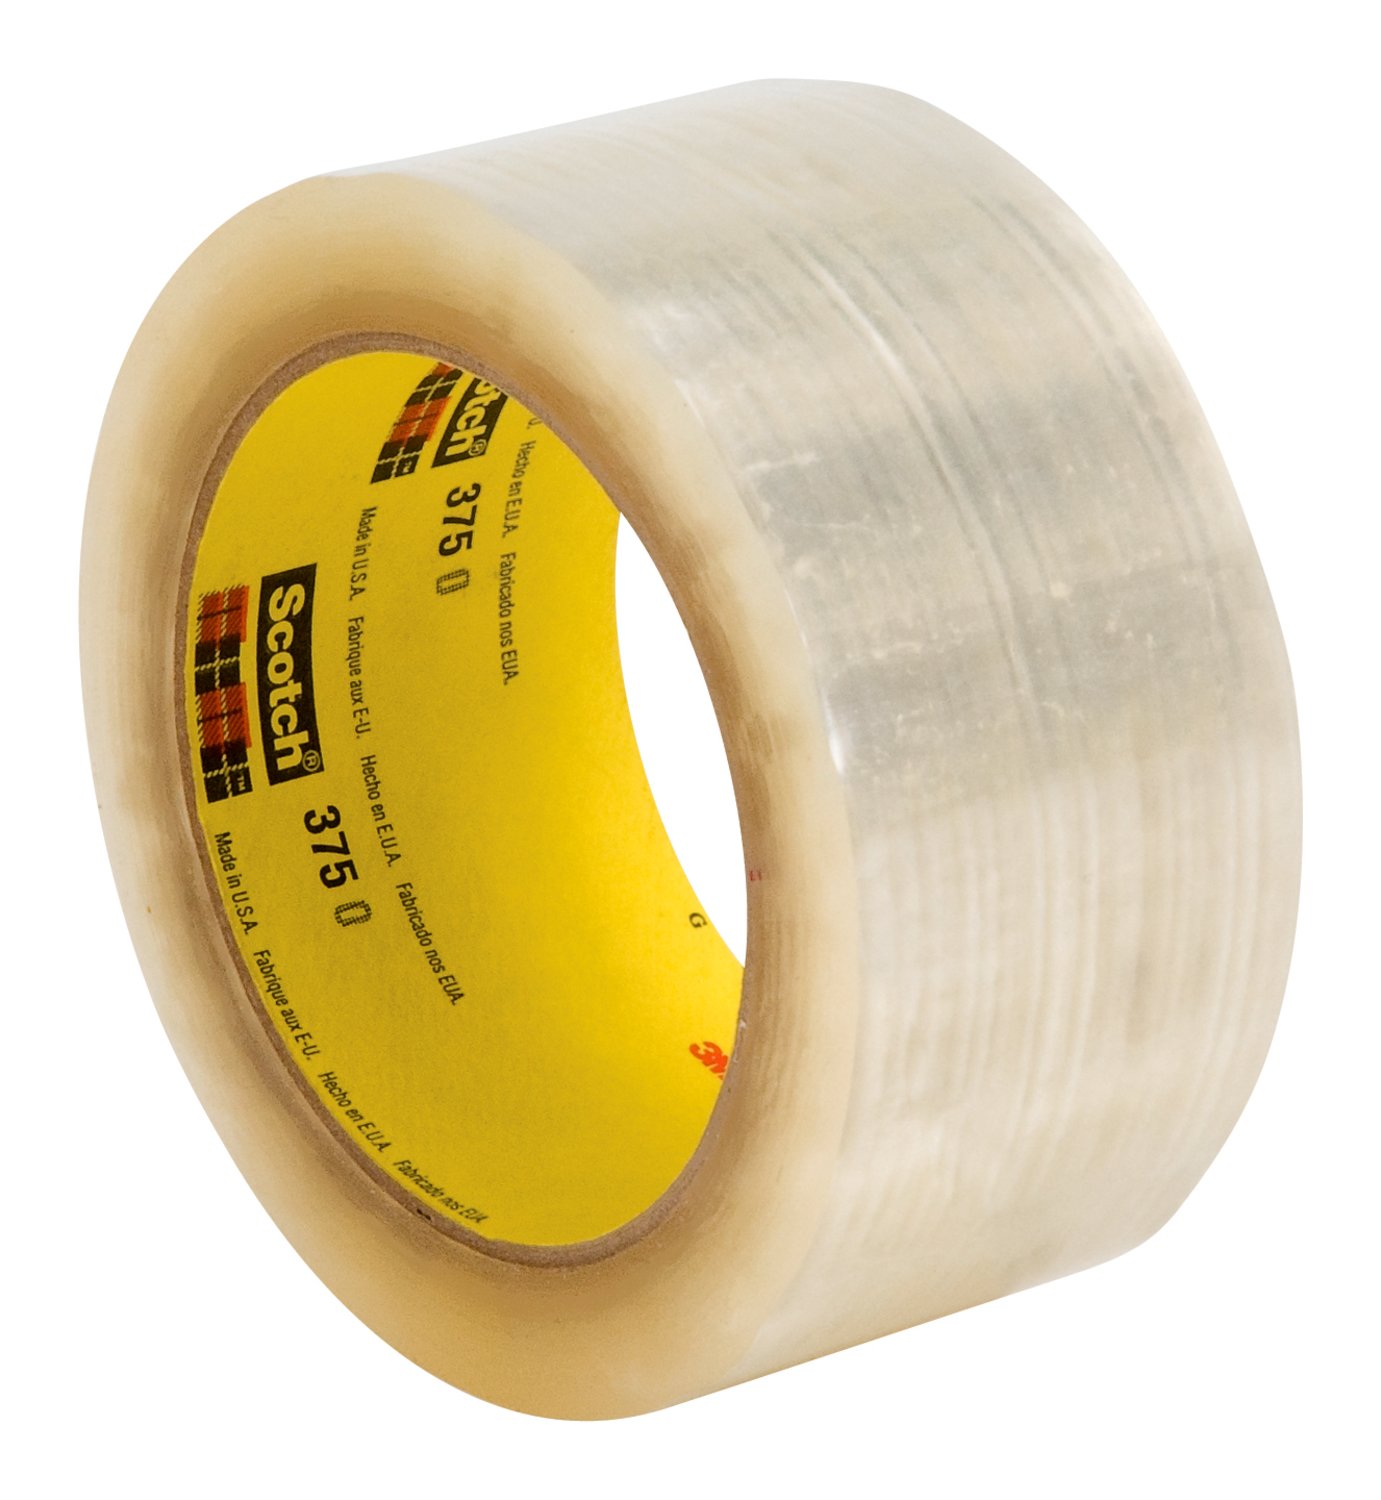 Mr. Pen- 3 inch Packing Tape, 2 Pack, Wide Tape, 45 Yards, 1.9mil, No  Smell, 3 inch Tape, Shipping Tape, Packaging Tape, Packing Tape Rolls,  Clear